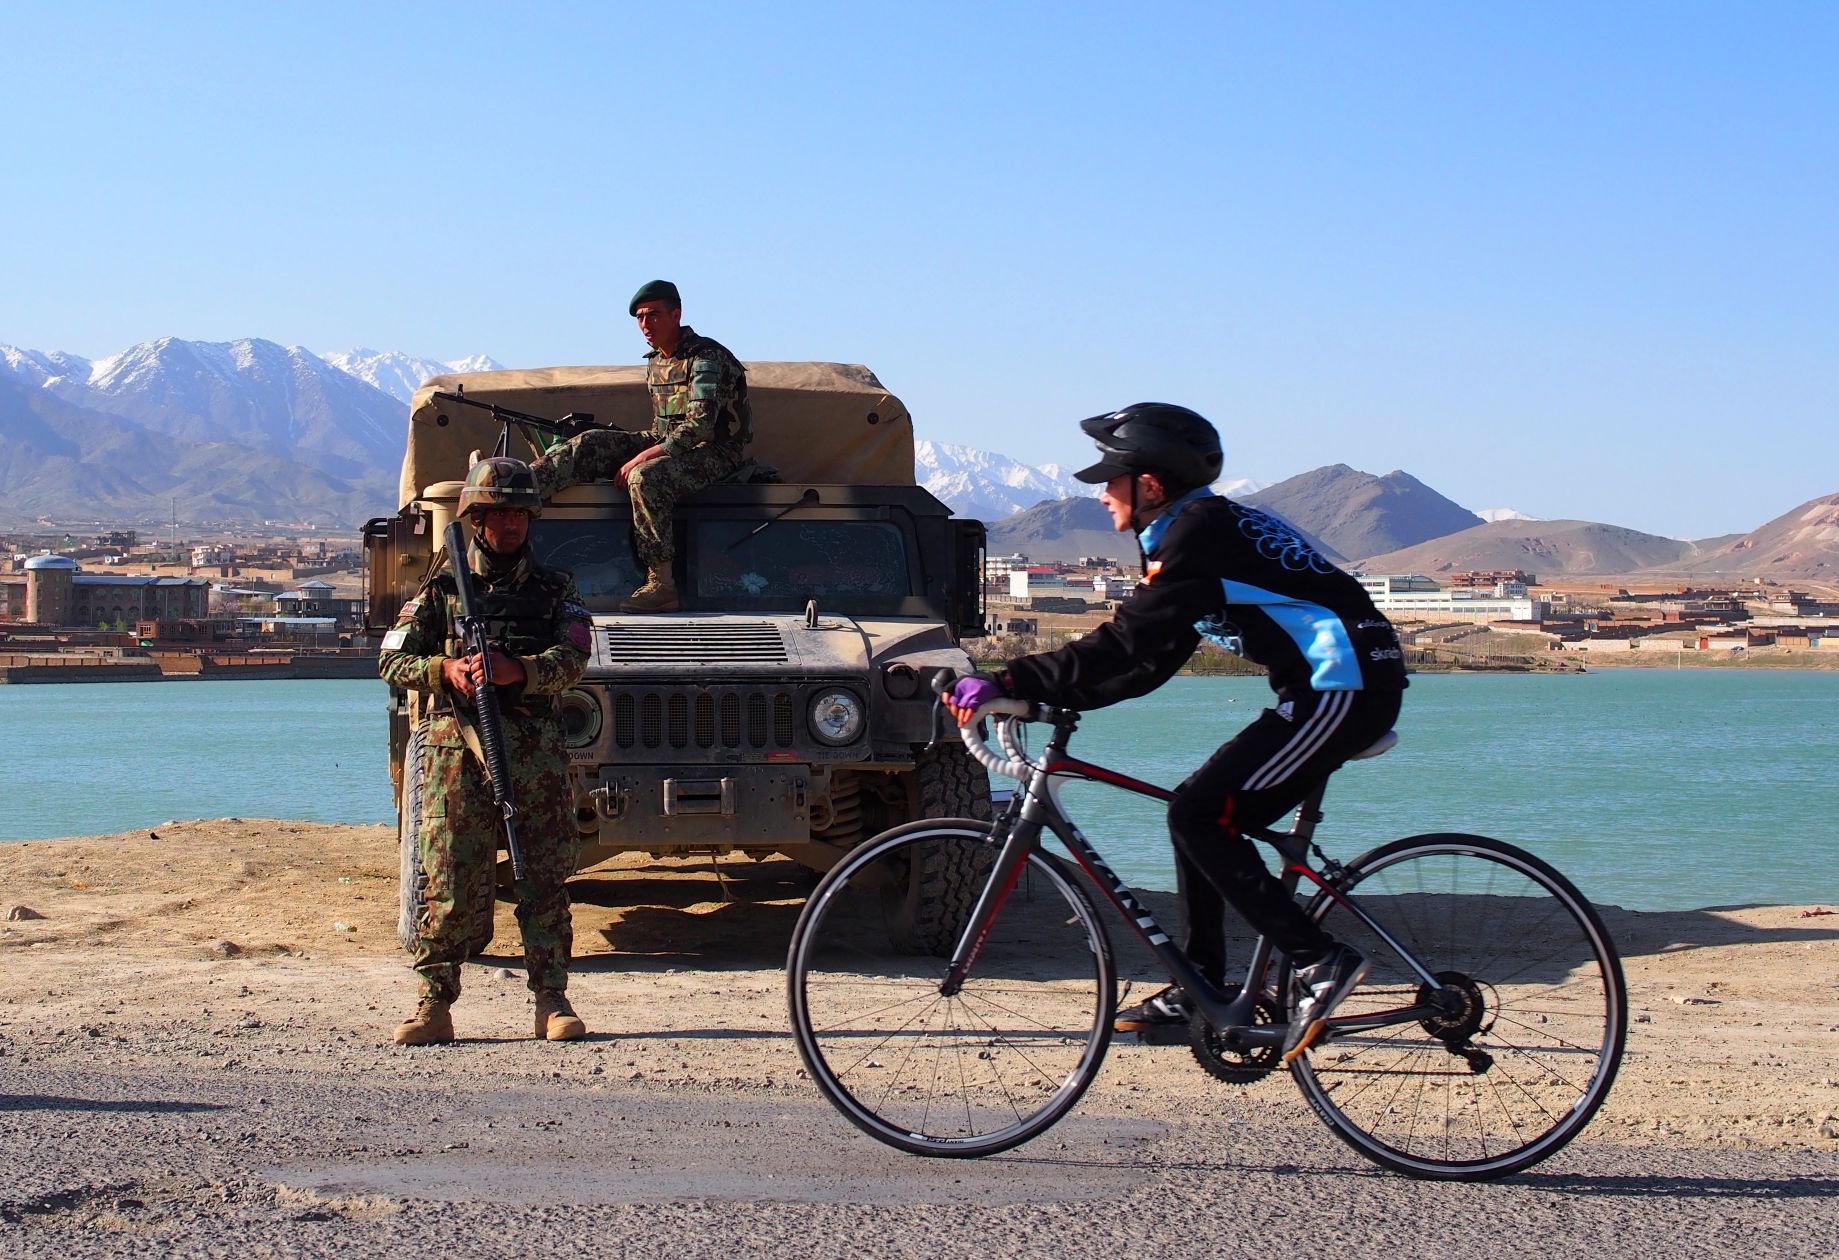 A women cycling past a military presence, in front of the mountains of Afghanistan.